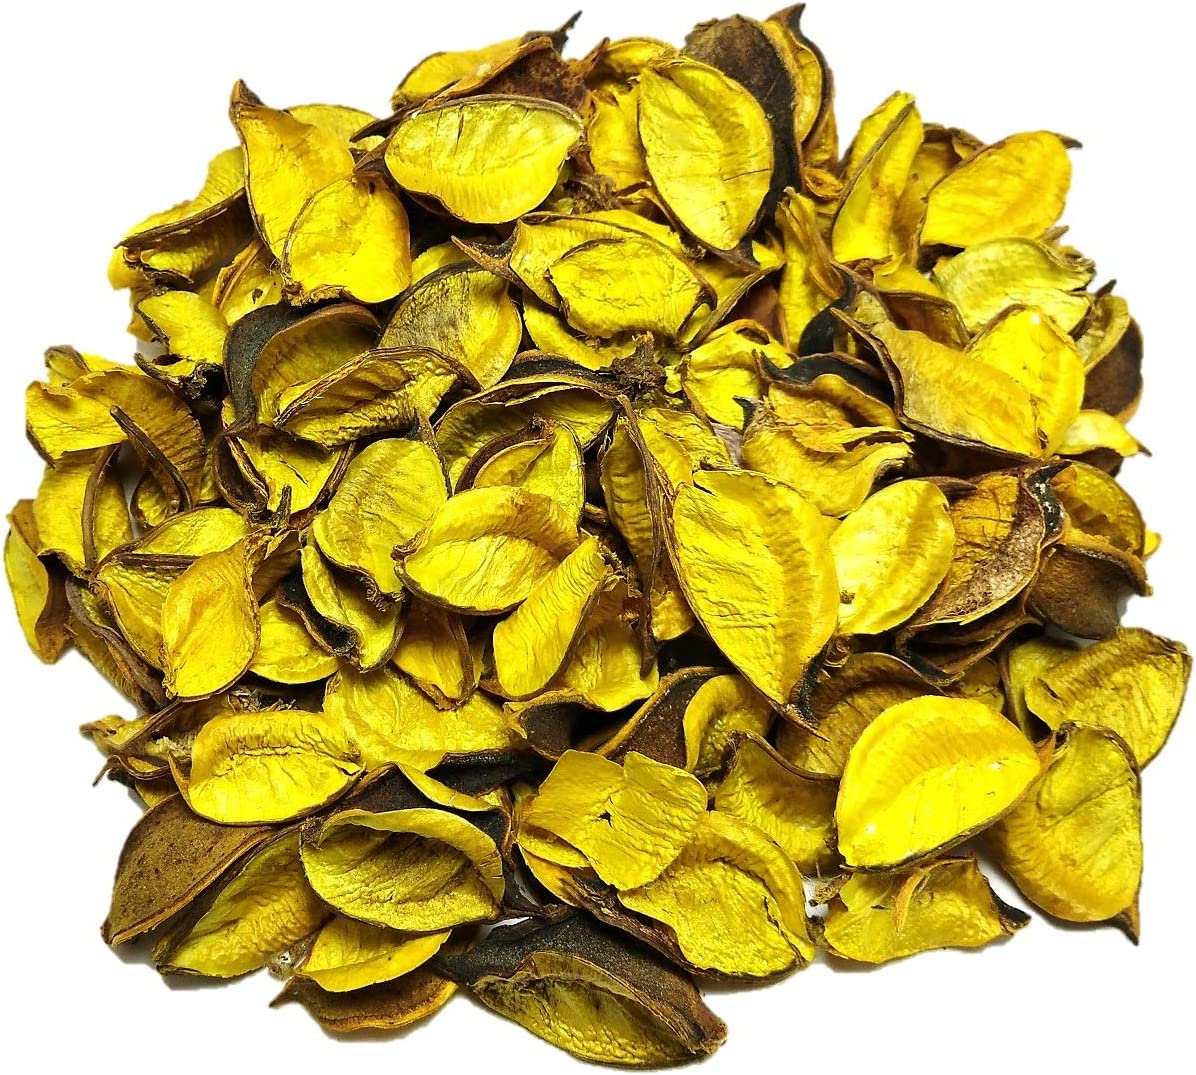 Lamansh 280 Rs each Packet🔥on Purchasing in bulk 📱at 8619550223 LAMANSH® Potpourri Dried Flower Petals Leaves for Art & Craft / Gift Hamper 🎁 / Center table ( Packet of 850g )